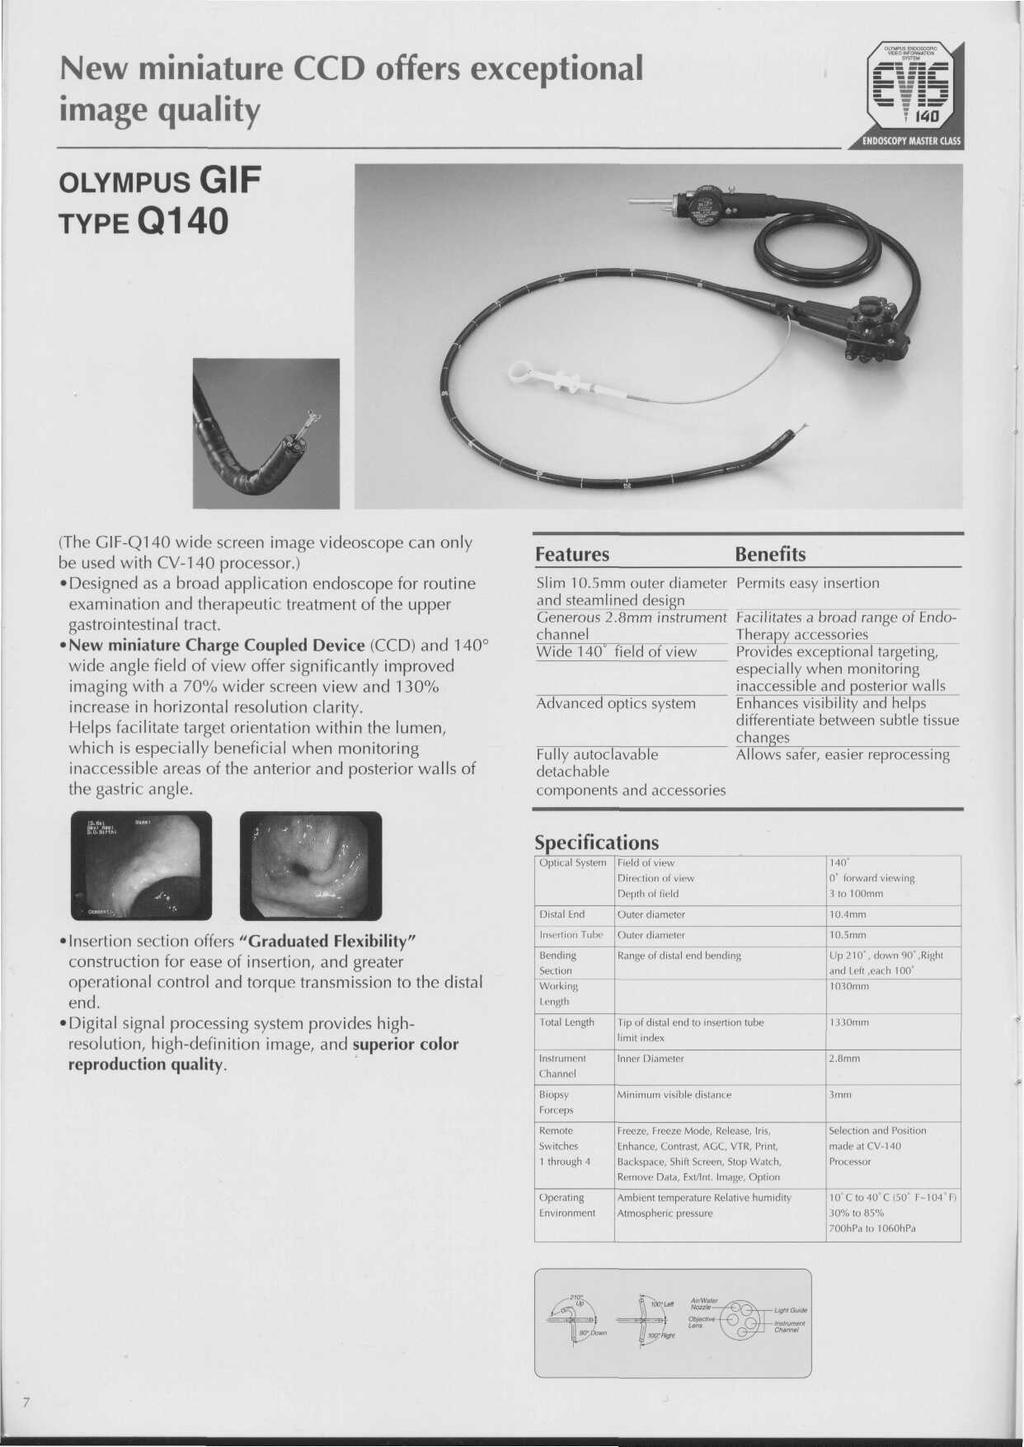 New miniature CCD offers exceptional image quality ENDOSCOPY MASTER CLASS OLYMPUS GIF TYPE Q140 (The GIFQ140 wide screen image videoscope can only be used with CV140 processor.